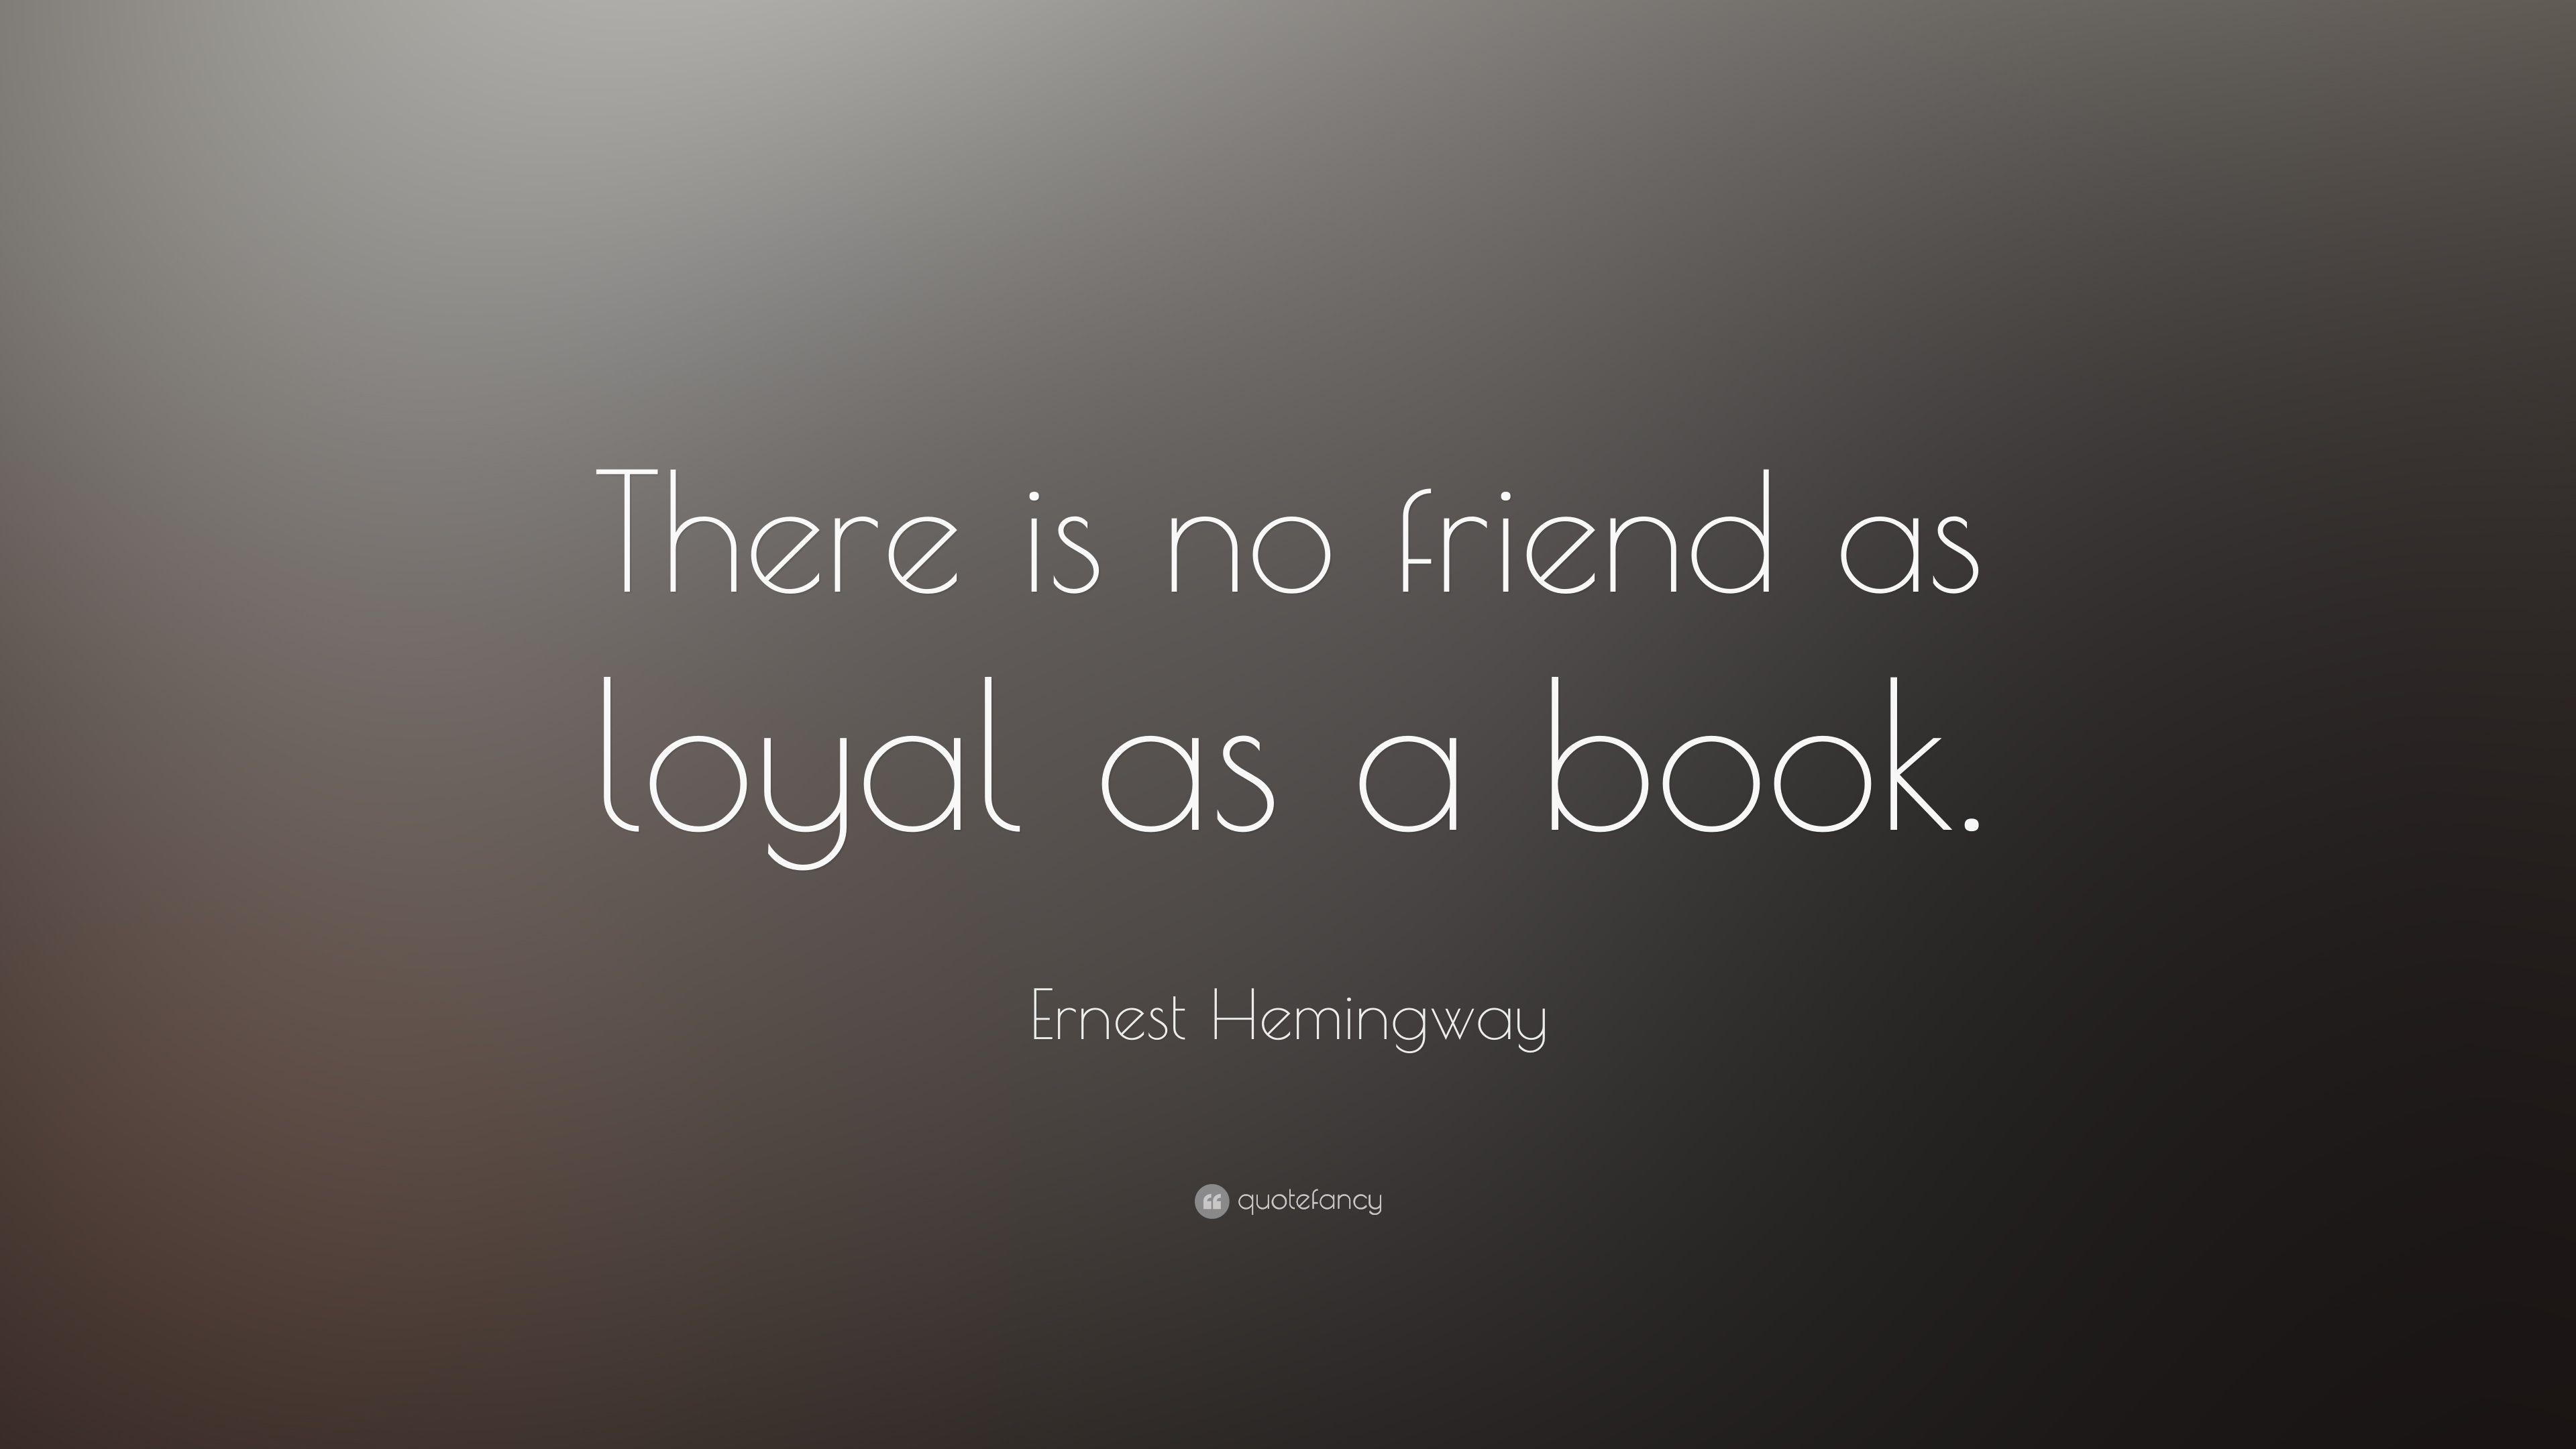 Ernest Hemingway Quote: “There is no friend as loyal as a book.” 17